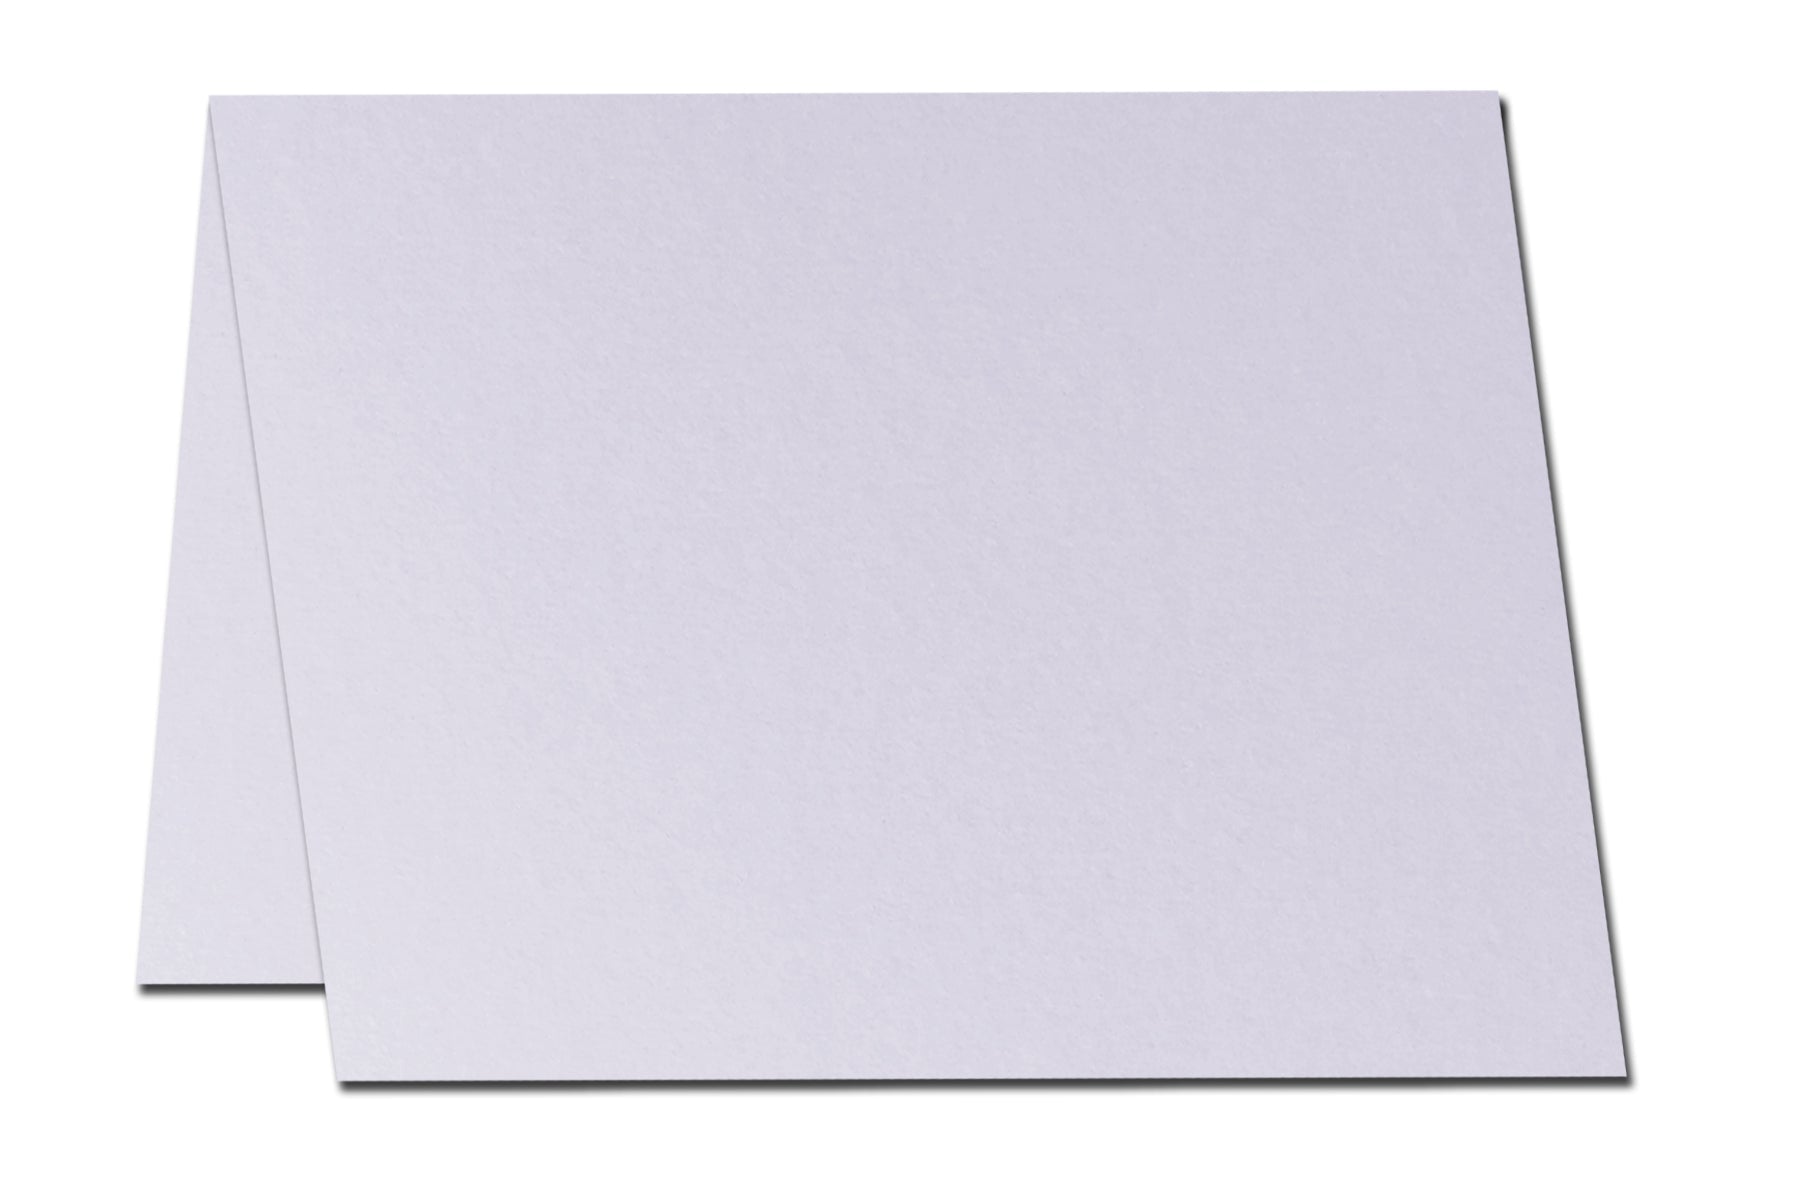 Buy Blank Cards And Envelopes Online. COD. Low Prices. Free Shipping.  Premium Quality.